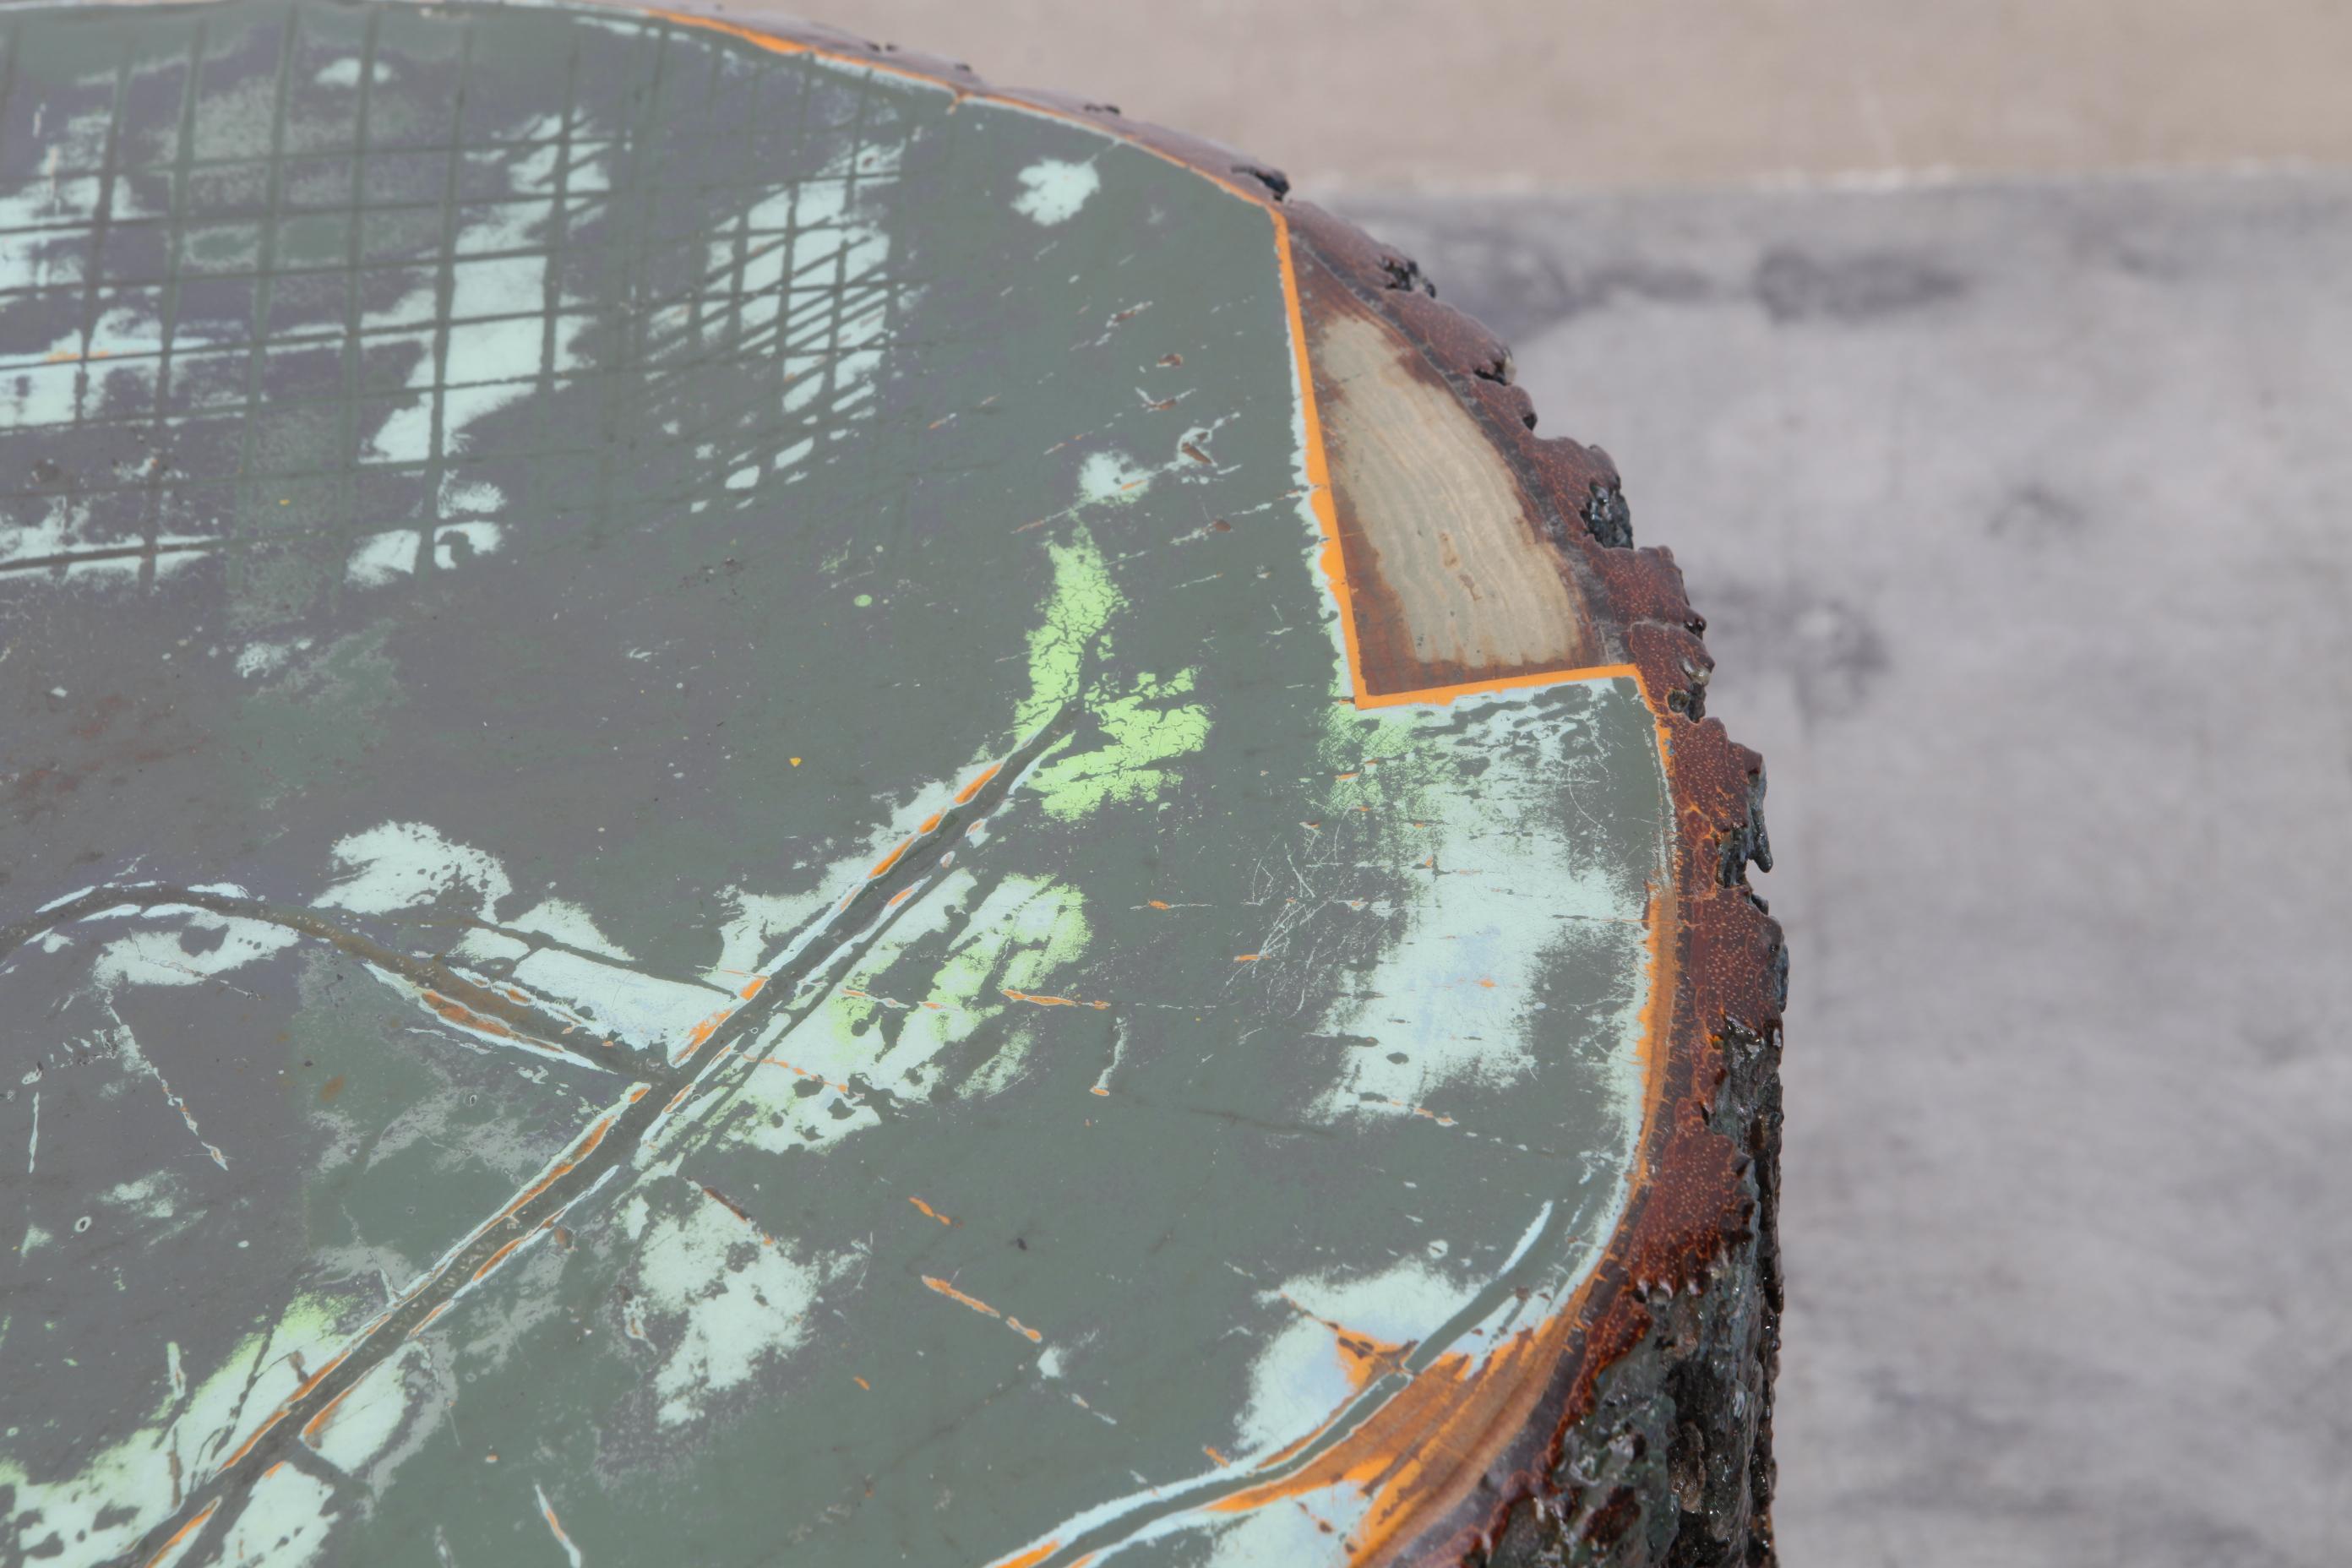 This tree trunk table is made out of a 10 years dread iece of wood I collected from a friends yard. It is hand painted in multiple layers, carved and lacquered 20 times with high gloss varnish.
Jeannerett was not the first Designer who made tree